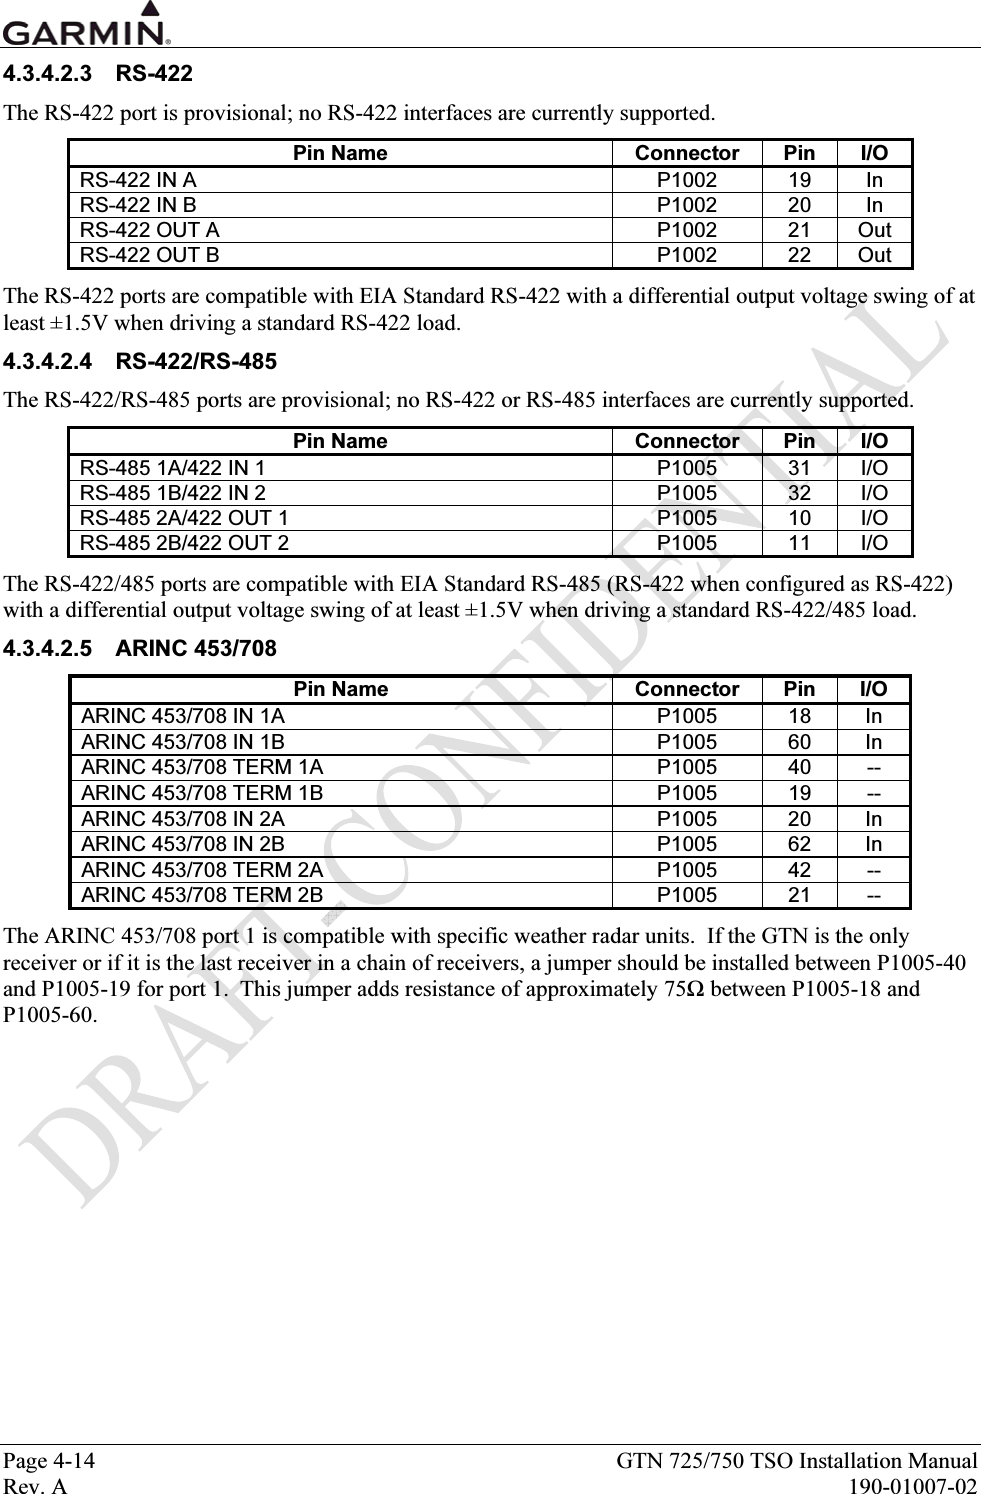  Page 4-14  GTN 725/750 TSO Installation Manual Rev. A  190-01007-02 4.3.4.2.3 RS-422 The RS-422 port is provisional; no RS-422 interfaces are currently supported. Pin Name  Connector  Pin  I/O RS-422 IN A  P1002  19  In RS-422 IN B  P1002  20  In RS-422 OUT A  P1002  21  Out RS-422 OUT B  P1002  22  Out The RS-422 ports are compatible with EIA Standard RS-422 with a differential output voltage swing of at least ±1.5V when driving a standard RS-422 load. 4.3.4.2.4 RS-422/RS-485 The RS-422/RS-485 ports are provisional; no RS-422 or RS-485 interfaces are currently supported. Pin Name  Connector  Pin  I/O RS-485 1A/422 IN 1  P1005  31  I/O RS-485 1B/422 IN 2  P1005  32  I/O RS-485 2A/422 OUT 1  P1005  10  I/O RS-485 2B/422 OUT 2  P1005  11  I/O The RS-422/485 ports are compatible with EIA Standard RS-485 (RS-422 when configured as RS-422) with a differential output voltage swing of at least ±1.5V when driving a standard RS-422/485 load. 4.3.4.2.5 ARINC 453/708 Pin Name  Connector  Pin  I/O ARINC 453/708 IN 1A  P1005  18  In ARINC 453/708 IN 1B  P1005  60  In ARINC 453/708 TERM 1A  P1005  40  -- ARINC 453/708 TERM 1B  P1005  19  -- ARINC 453/708 IN 2A  P1005  20  In ARINC 453/708 IN 2B  P1005  62  In ARINC 453/708 TERM 2A  P1005  42  -- ARINC 453/708 TERM 2B  P1005  21  -- The ARINC 453/708 port 1 is compatible with specific weather radar units.  If the GTN is the only receiver or if it is the last receiver in a chain of receivers, a jumper should be installed between P1005-40 and P1005-19 for port 1.  This jumper adds resistance of approximately 75Ω between P1005-18 and P1005-60.   